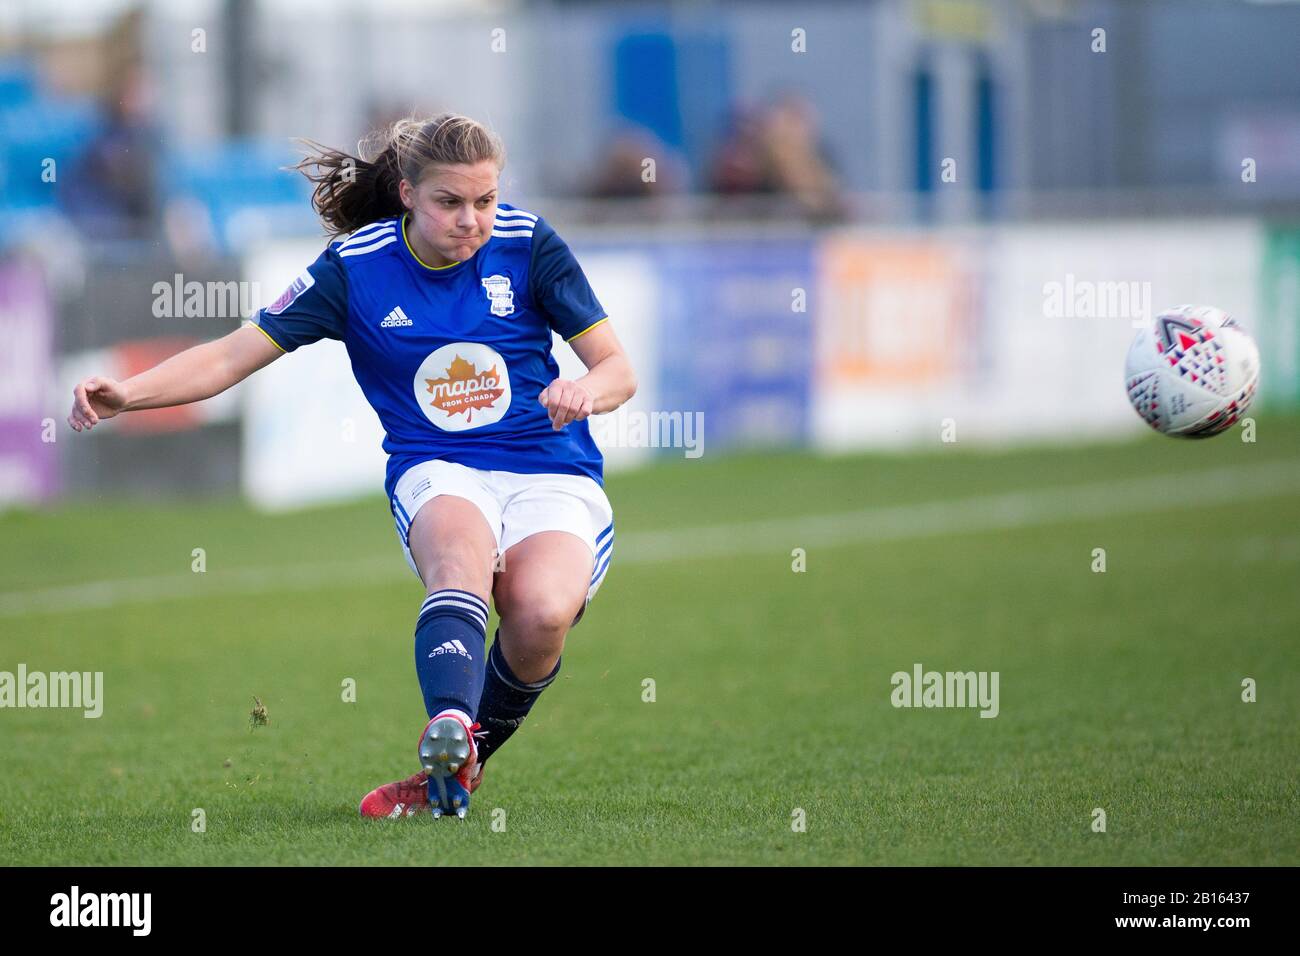 Solihull, West Midlands, UK. 23rd Feb, 2020. Bristol City Women 1 - 0 BCFC Women. Birmingham City's Sarah Mayling puts the ball into play for a goal attack. Credit: Peter Lopeman/Alamy Live News Stock Photo